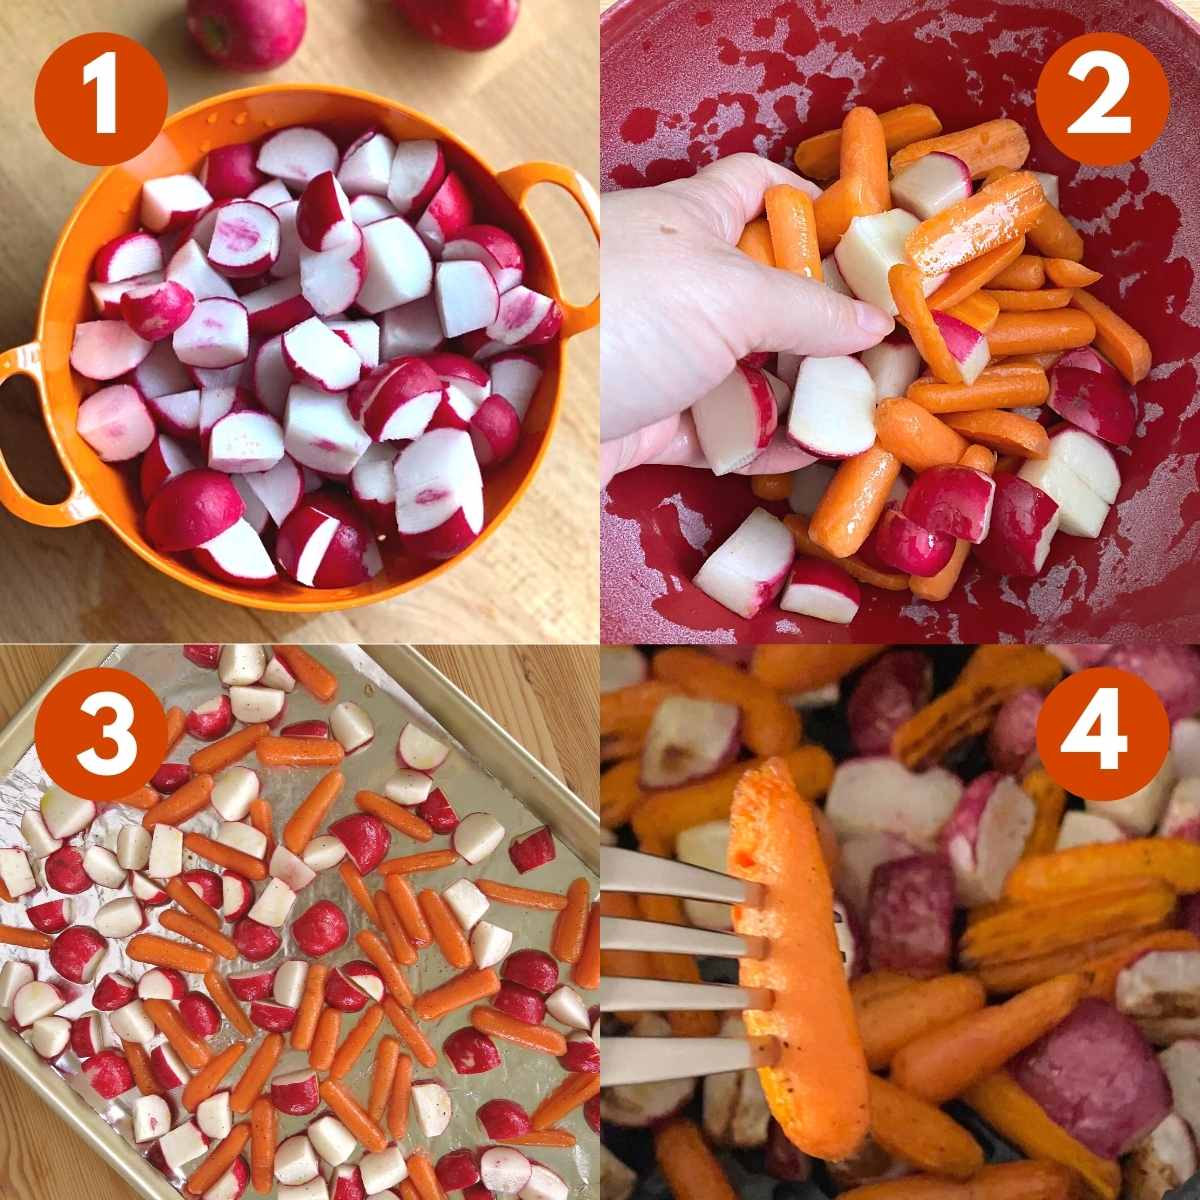 Numbered steps to roast radishes and carrots in the oven.